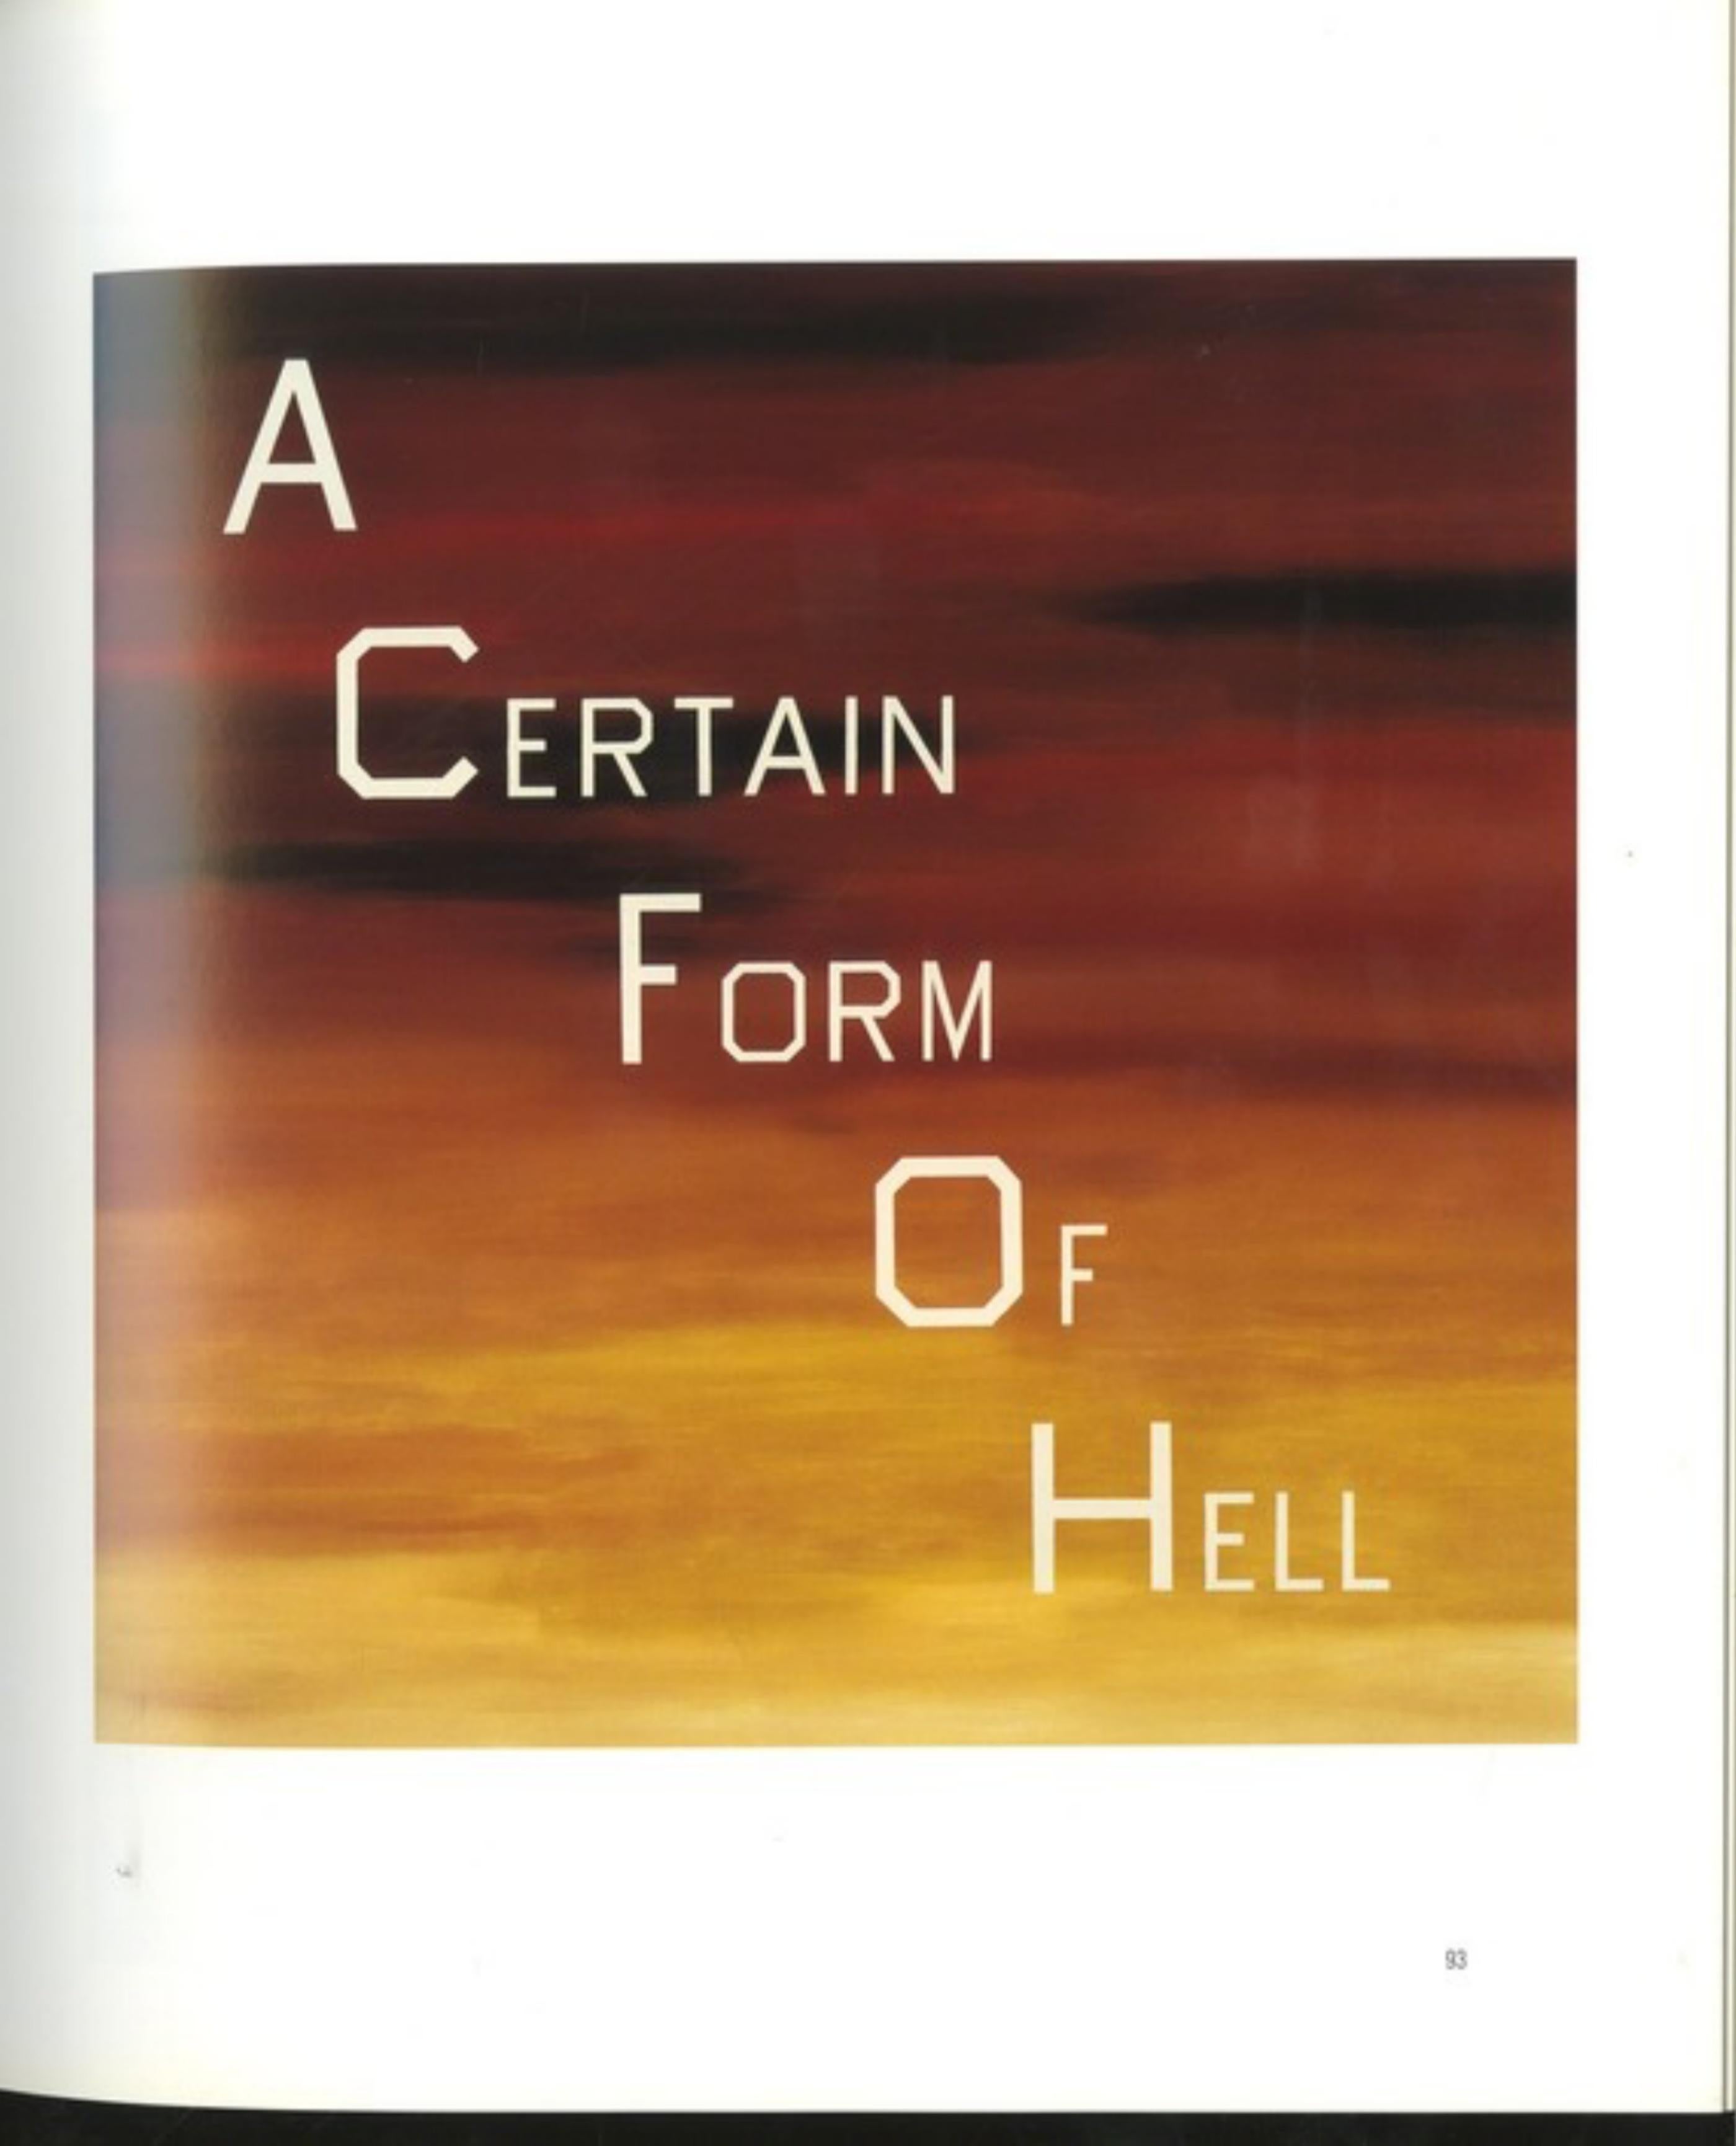 Hardback Monograph: hand signed and inscribed to  ex owner of 20th Century Fox - Brown Abstract Print by Ed Ruscha